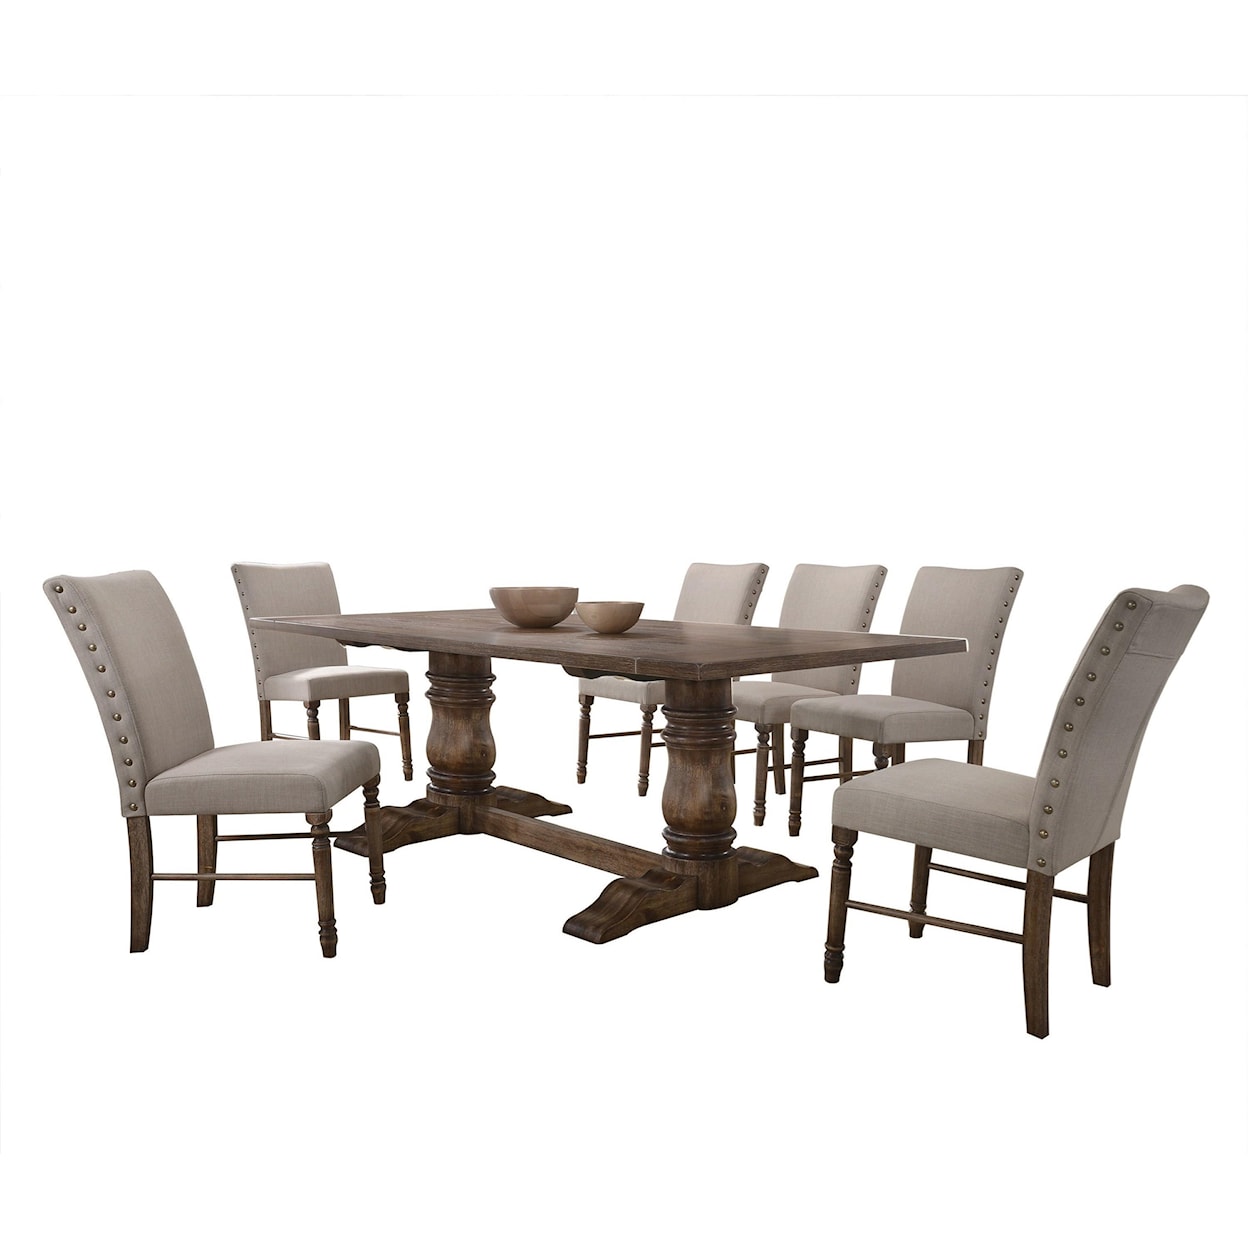 Acme Furniture Leventis Dining Table